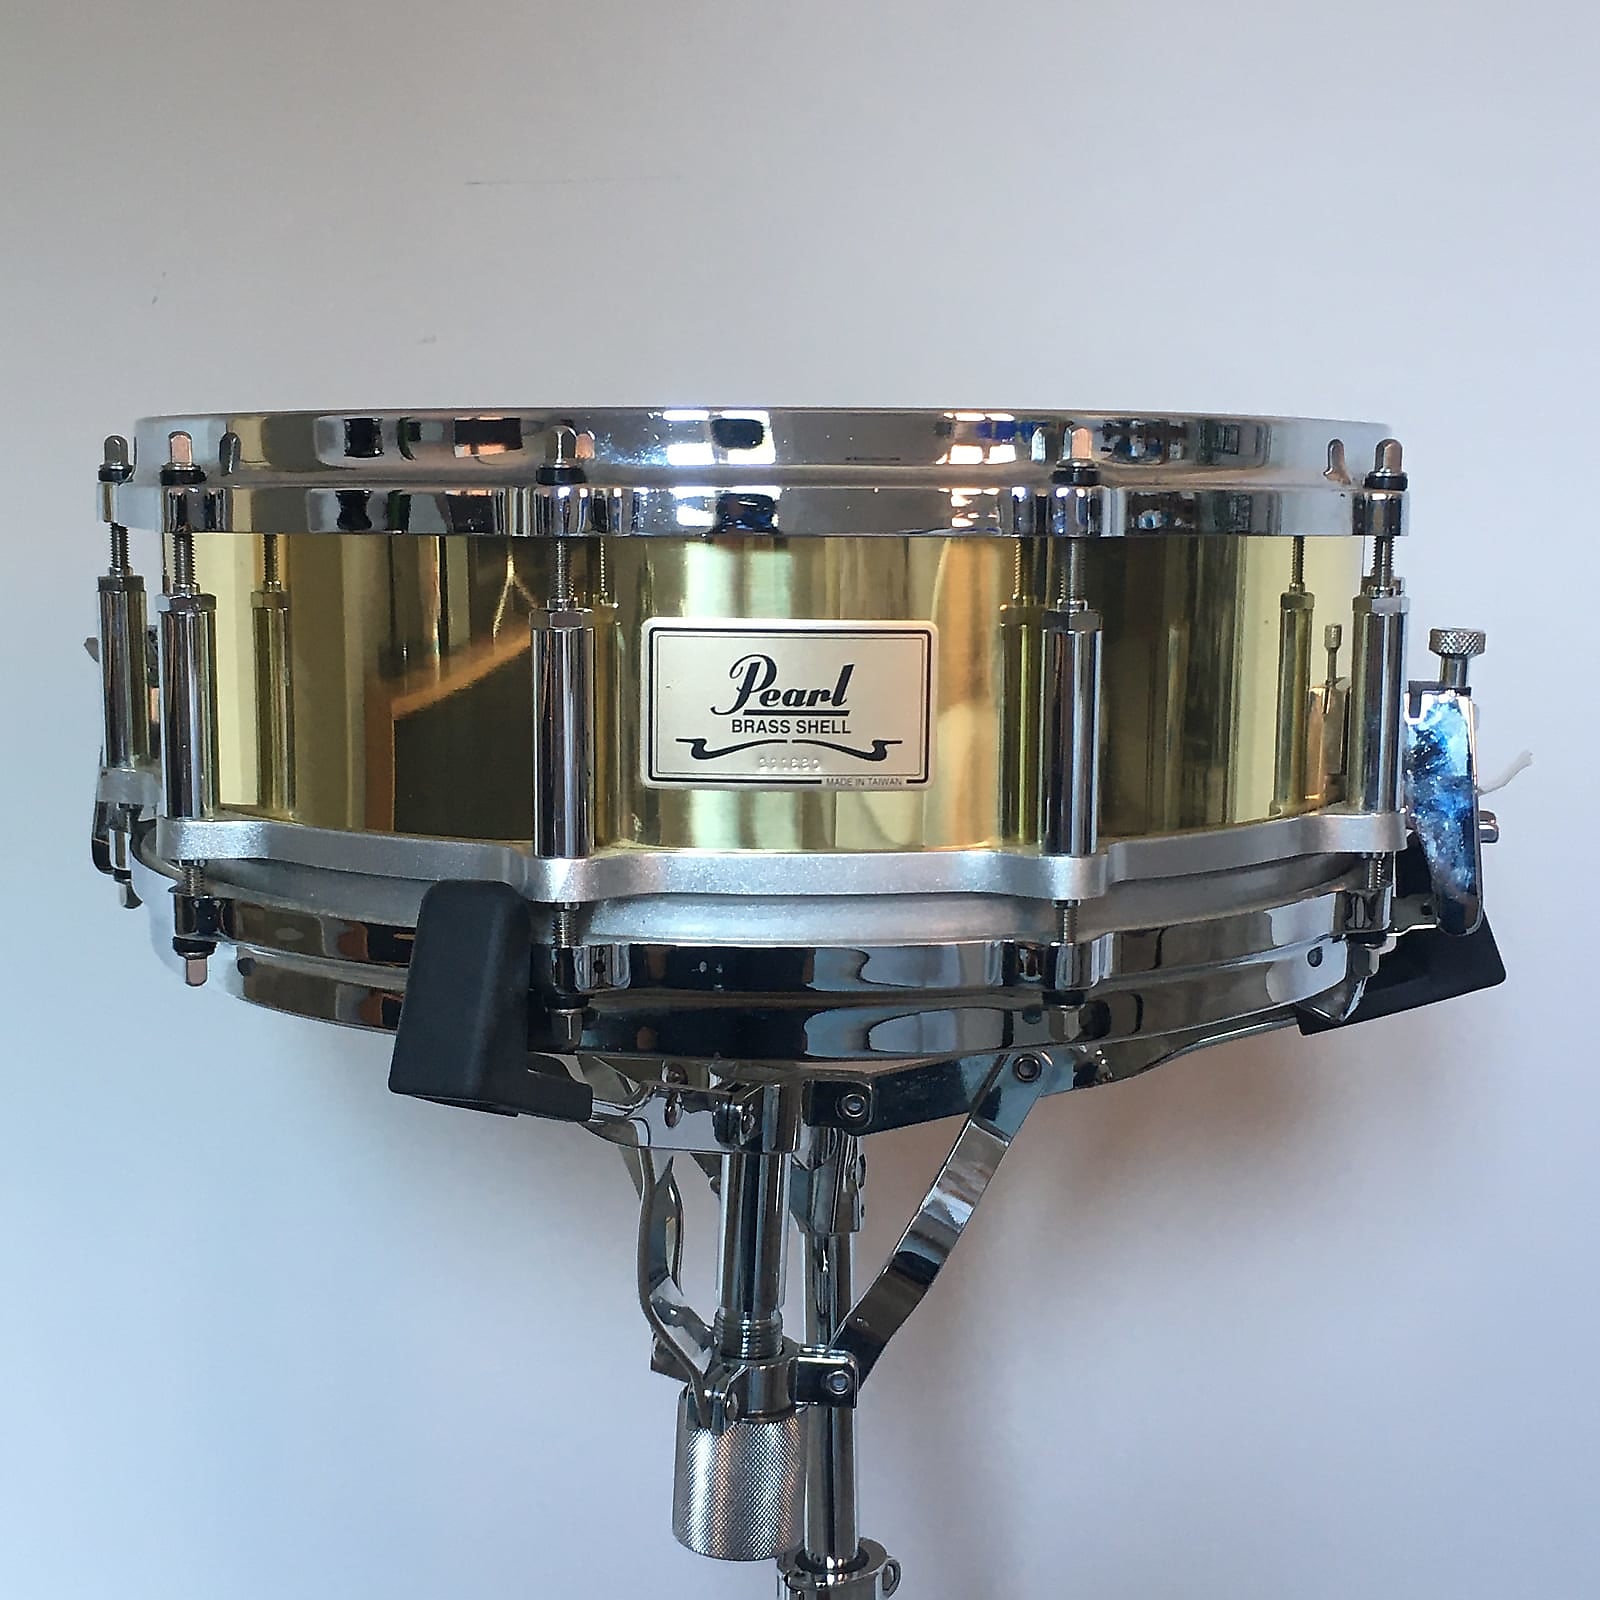 Pearl B-9114 / FB-1450 Free-Floating Brass 14x5 Snare Drum (2nd Gen) 1992  - 2004 | Reverb